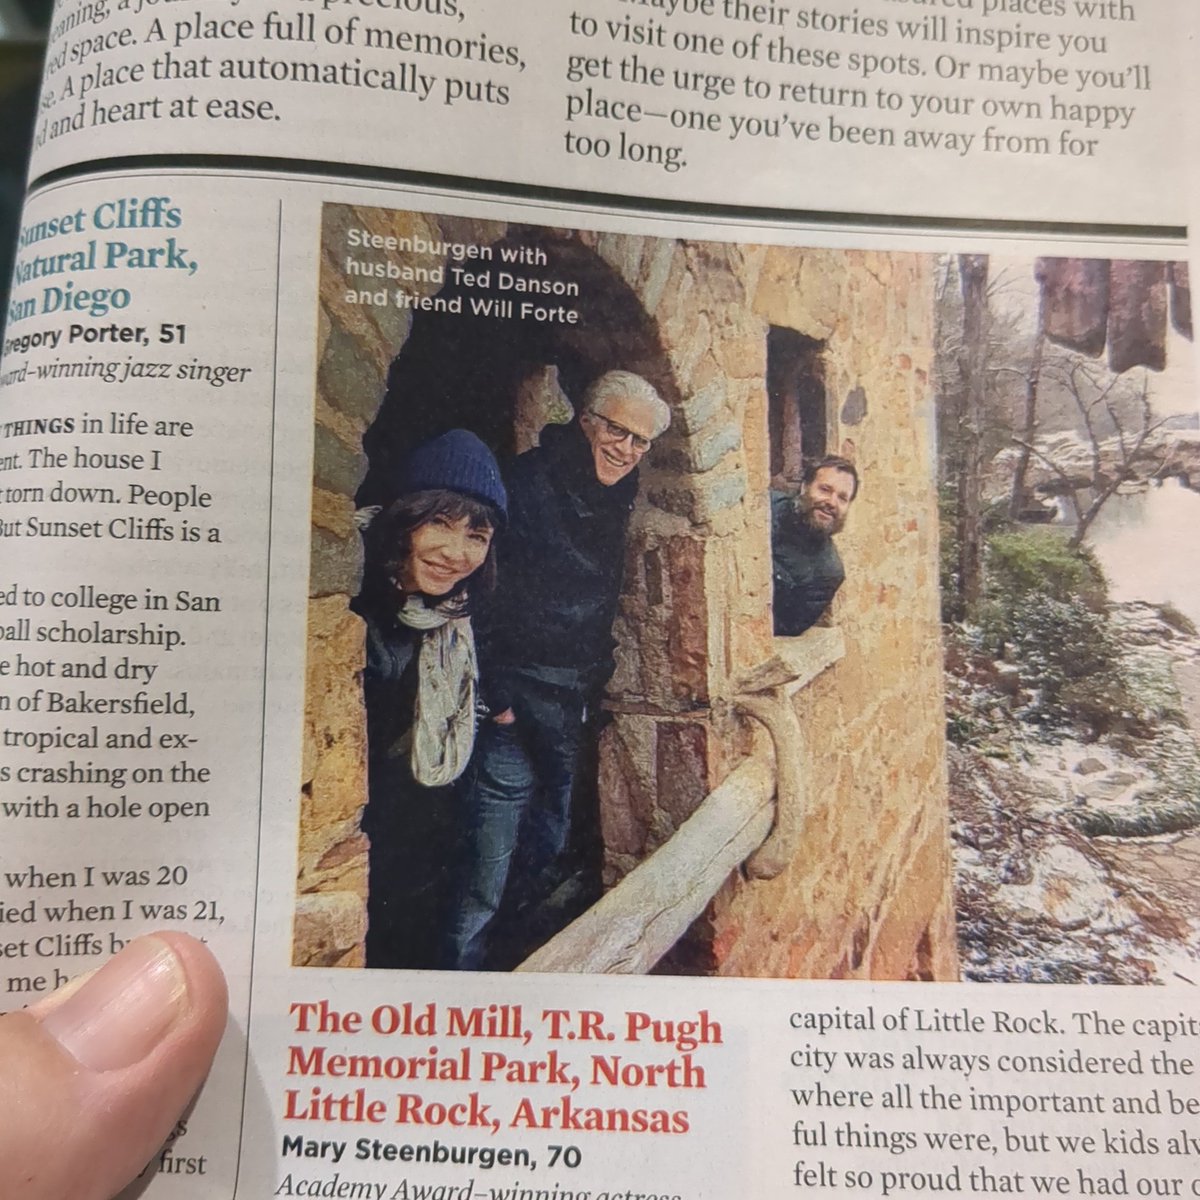 My stars, @MarySteenburgen at the Old Mill in this month's AARP magazine.  Just down the street from where she grew up. How about that!